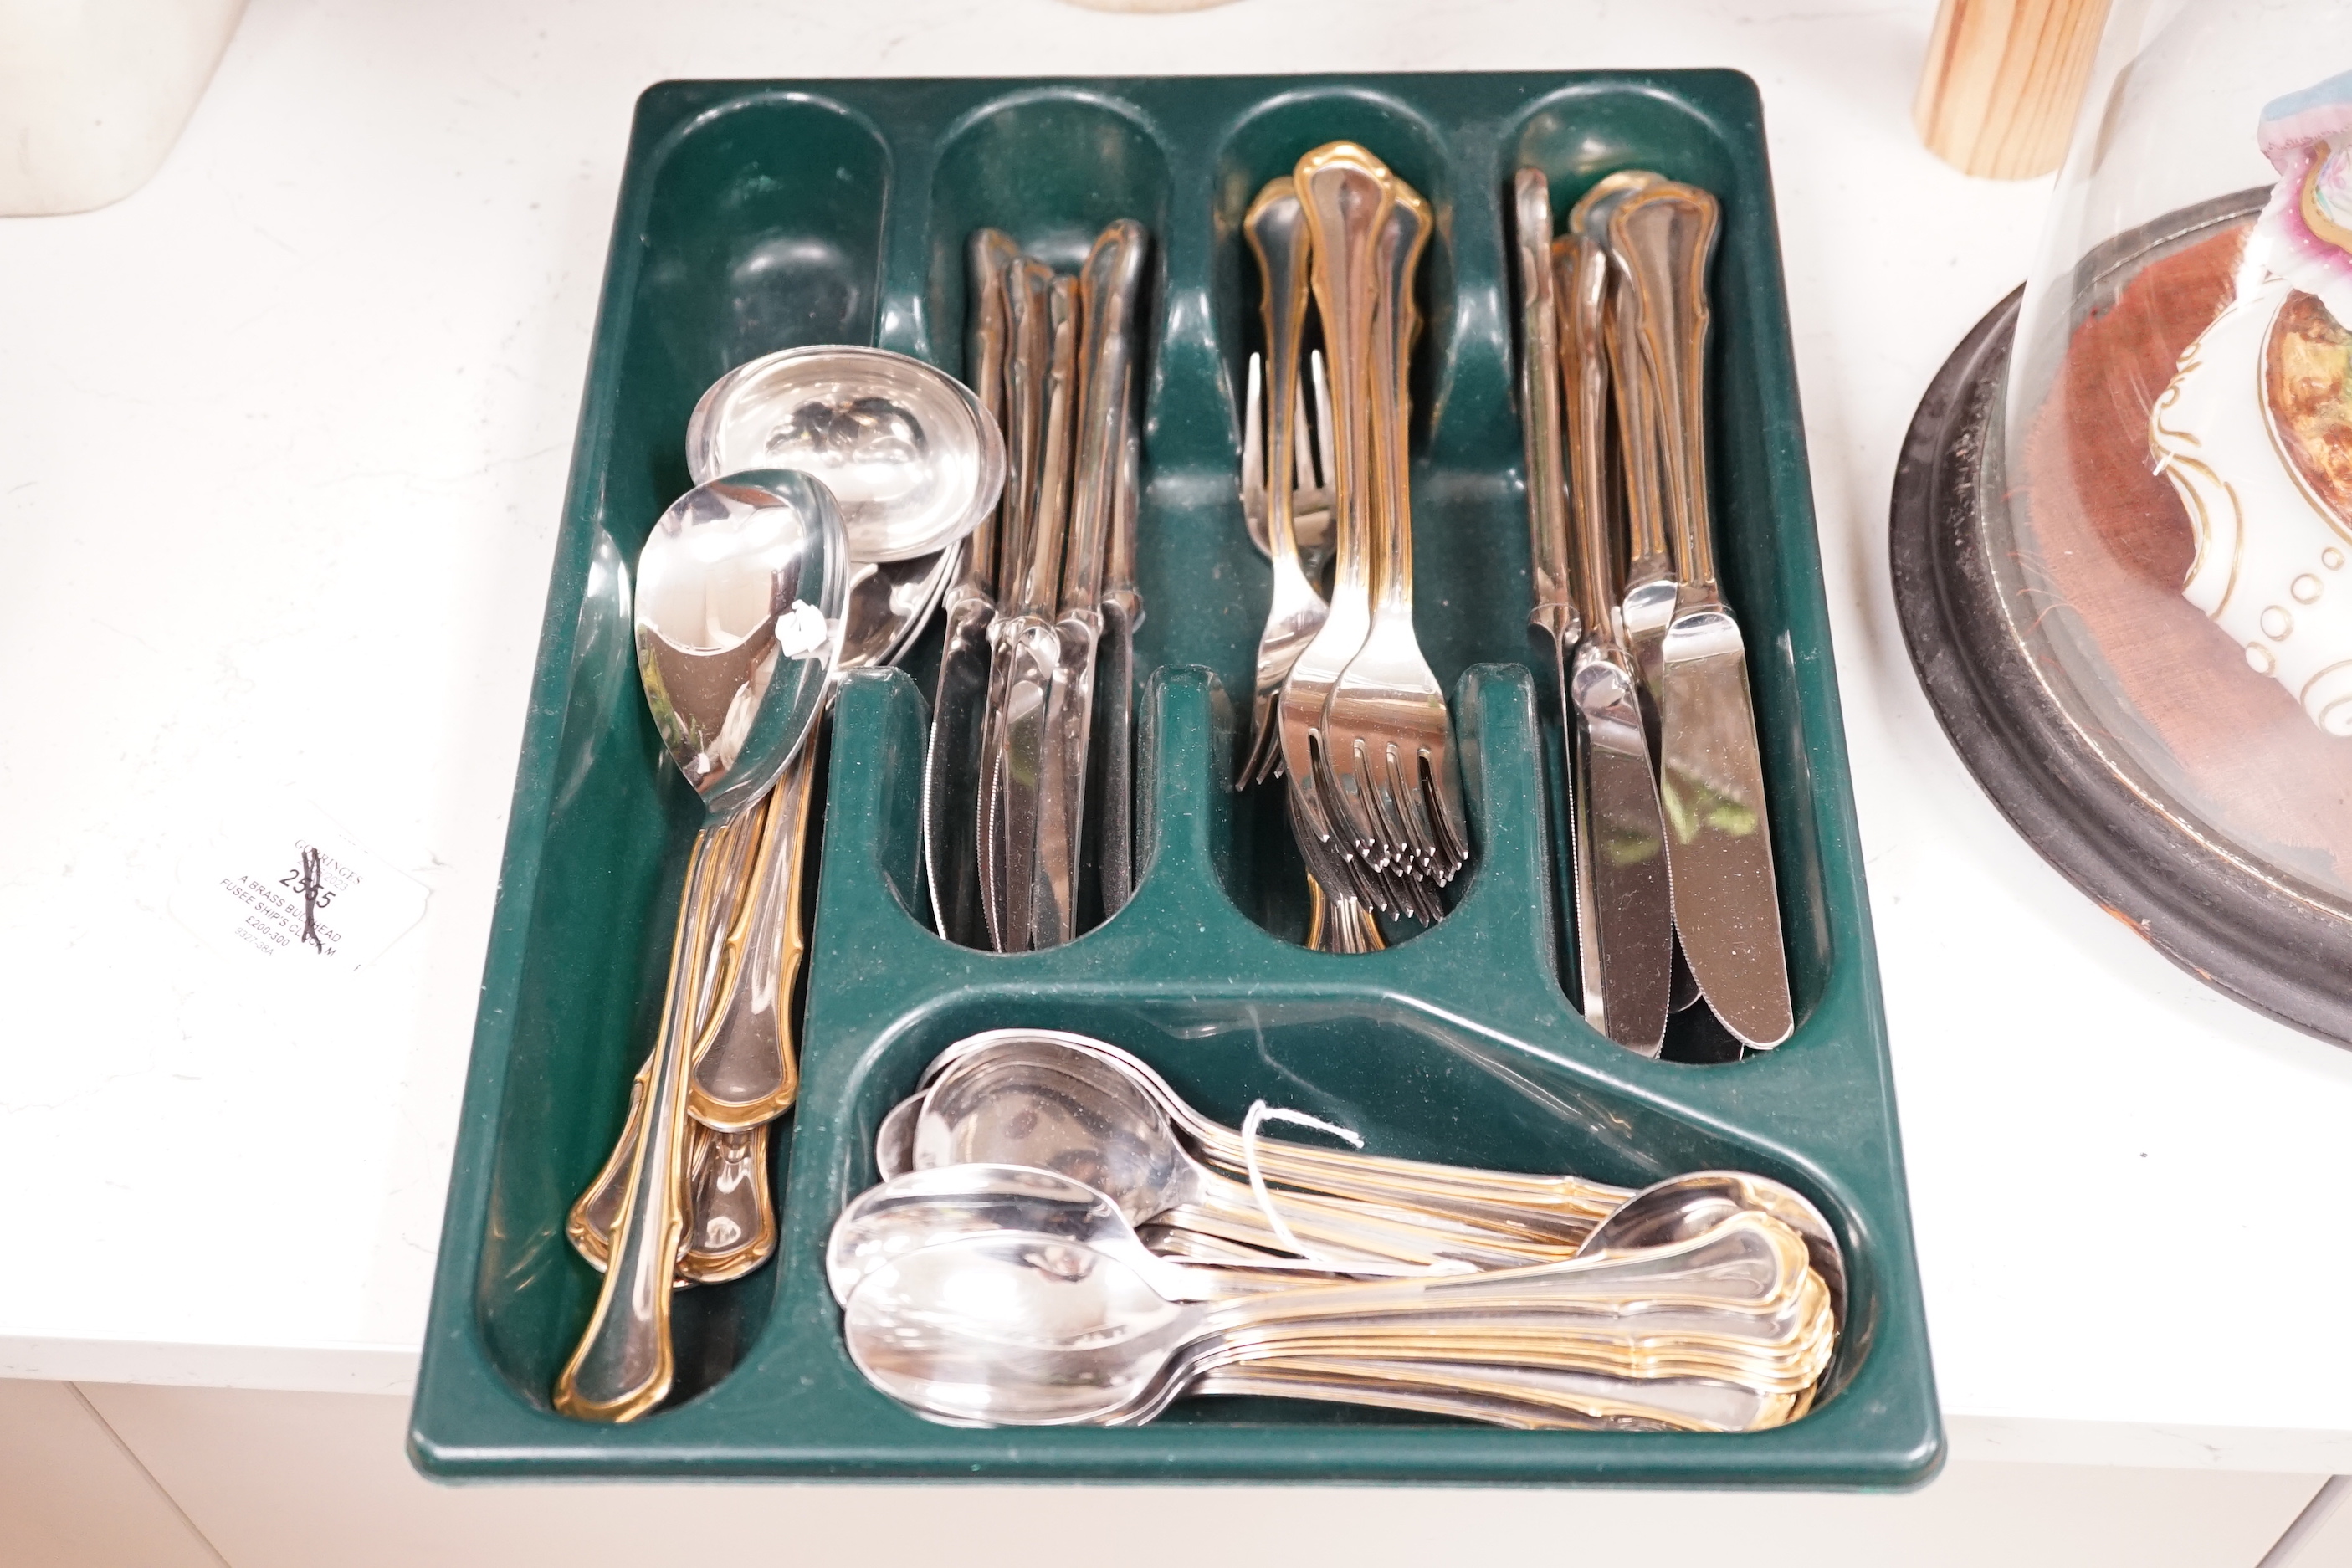 Assorted plated flatware and a pair of plated candlesticks